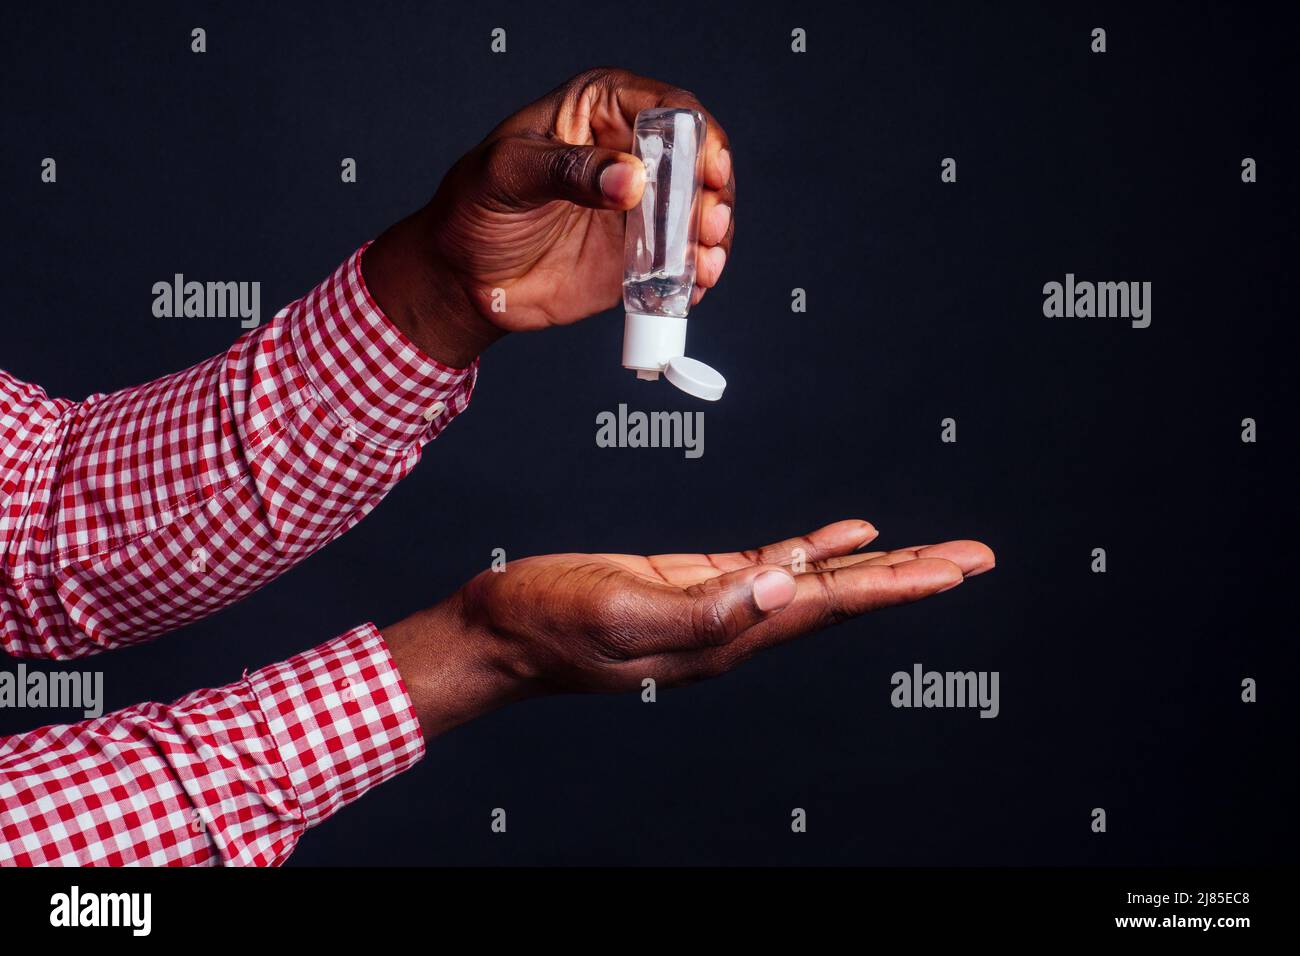 close up hands of afro male useing antiseptic in studio black background.washing hands before eating concept Stock Photo